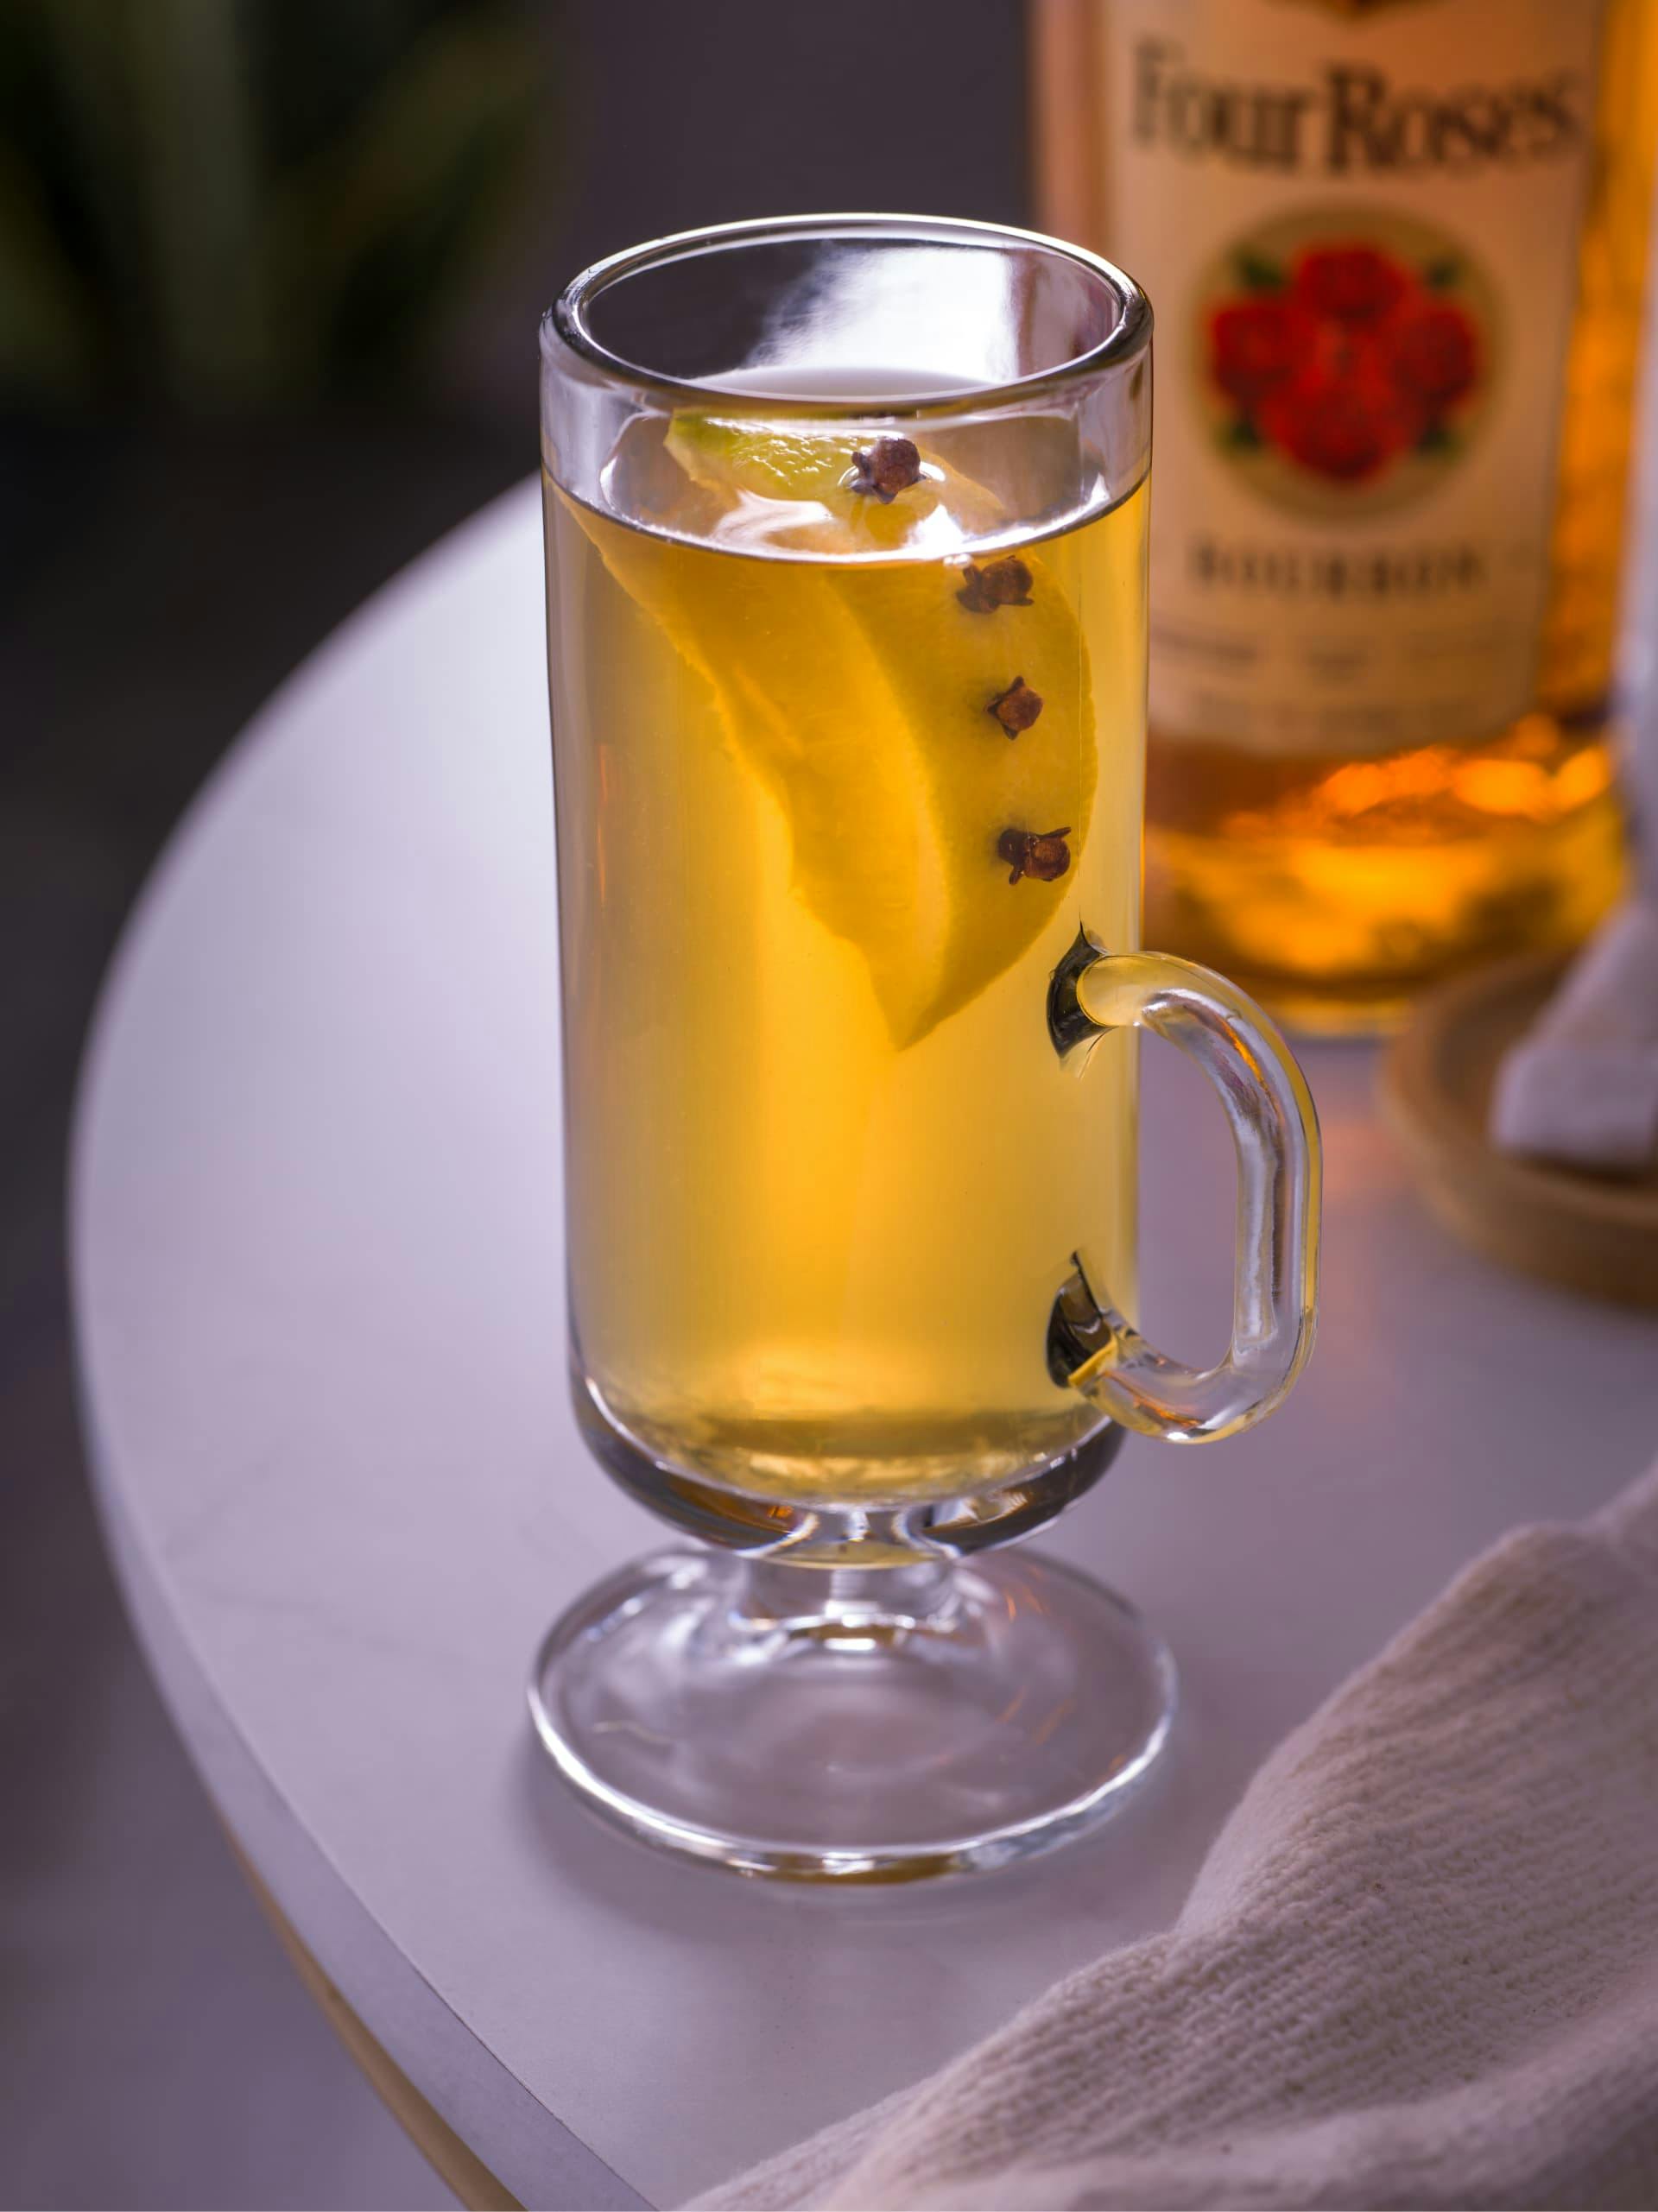 Add a Little Flair to Your Hot Toddy Recipe with Four…